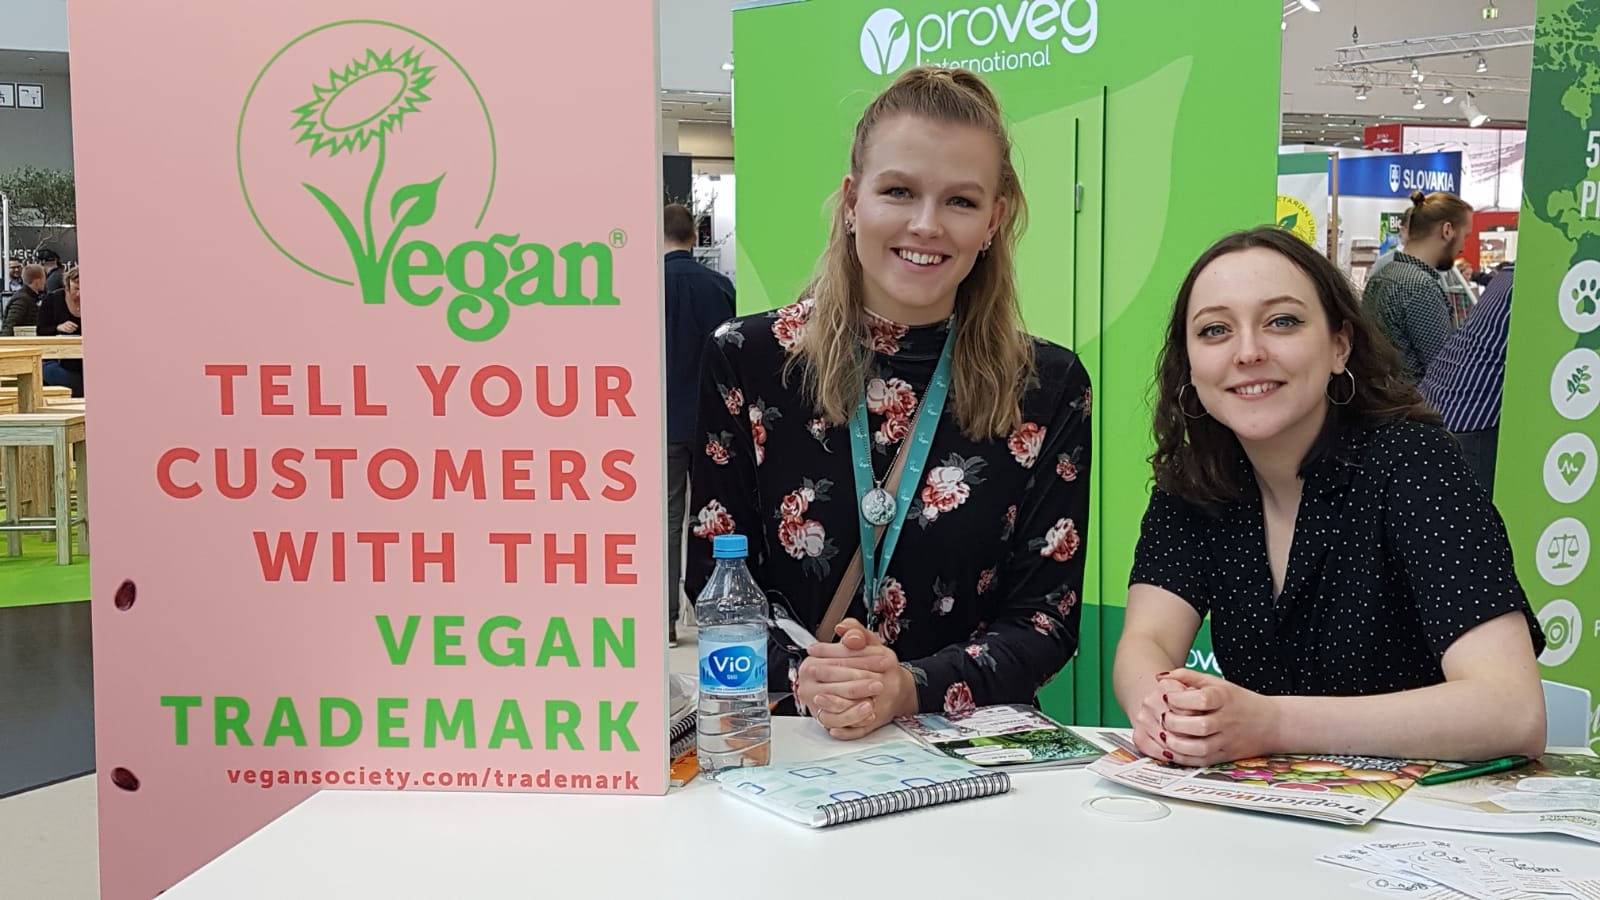 The Vegan Society promotes the certified animal free products with the Vegan Trademark